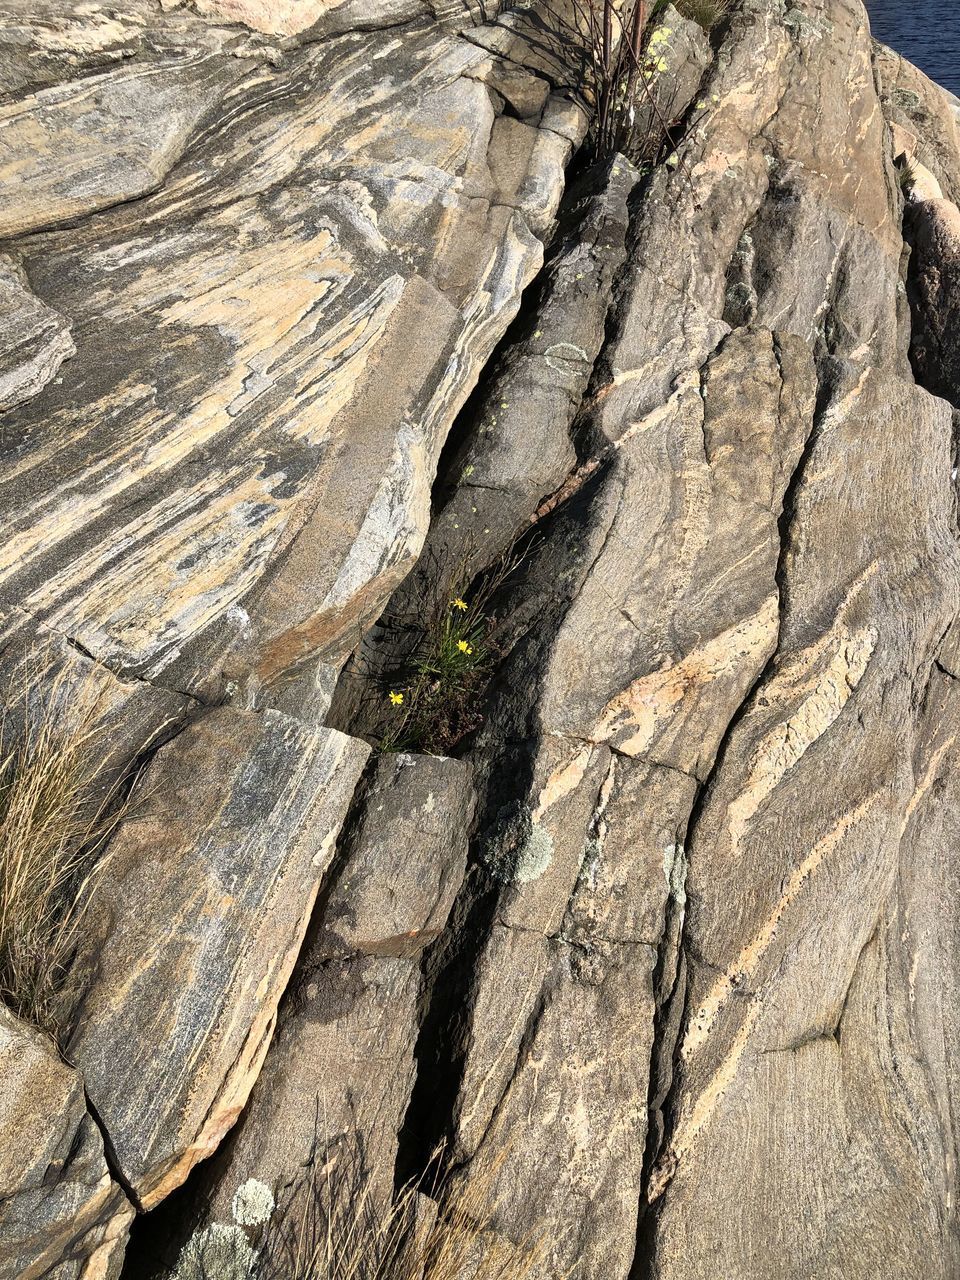 VIEW OF A ROCK